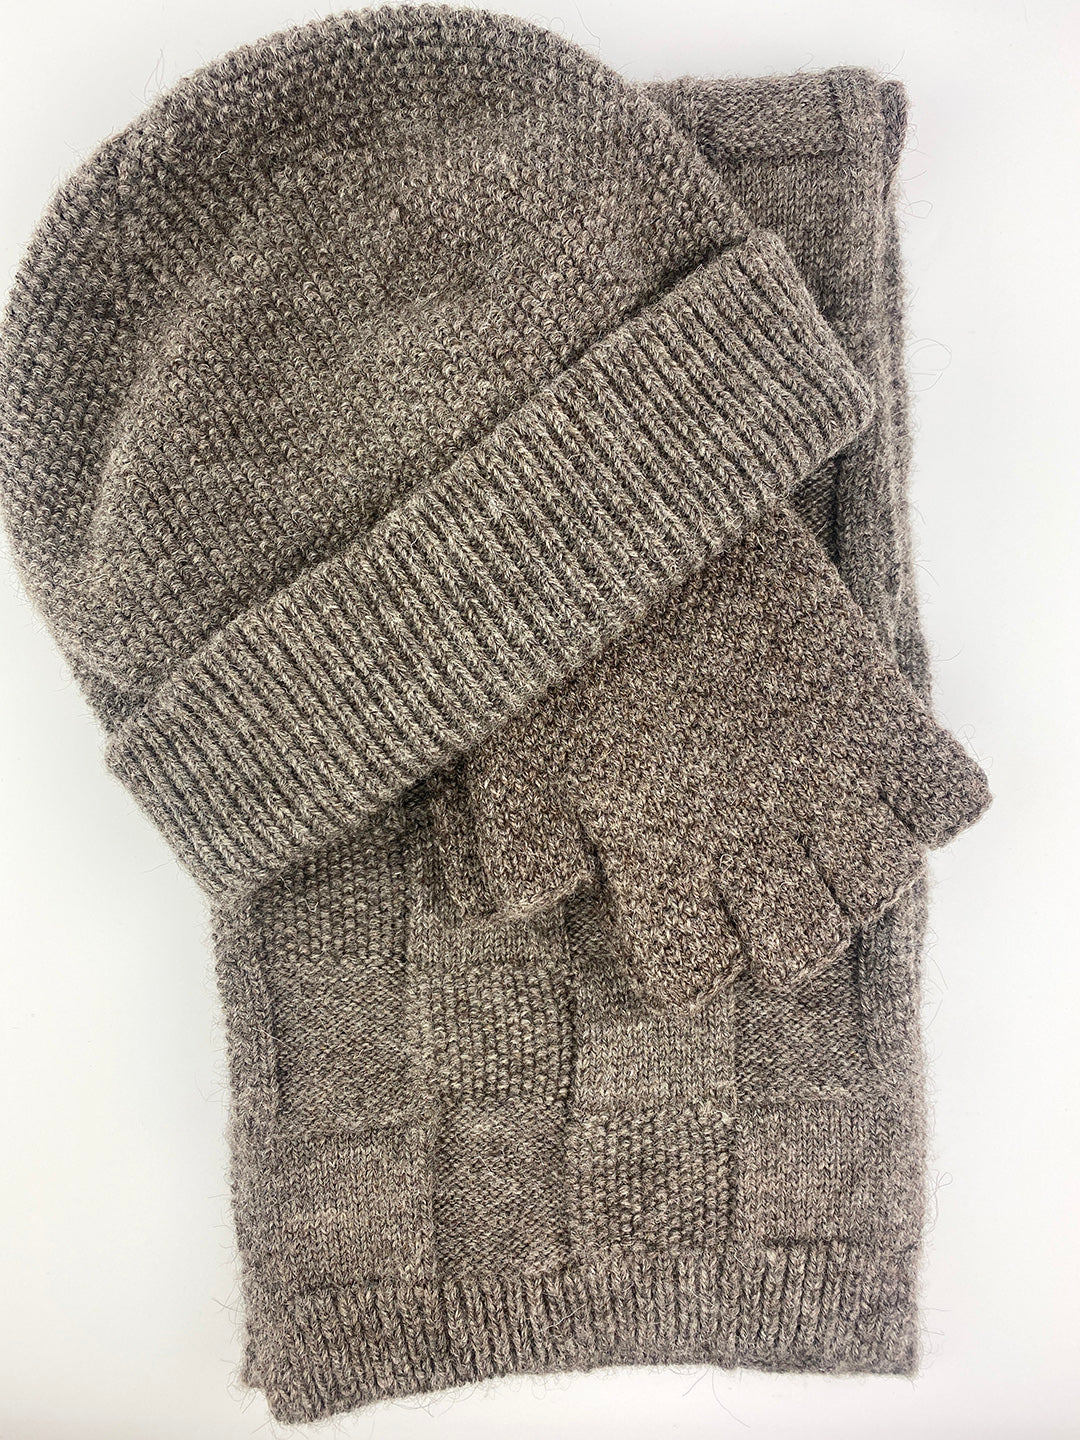 Pure undyed British wool scarf, hat and fingerless gloves in natural brown.